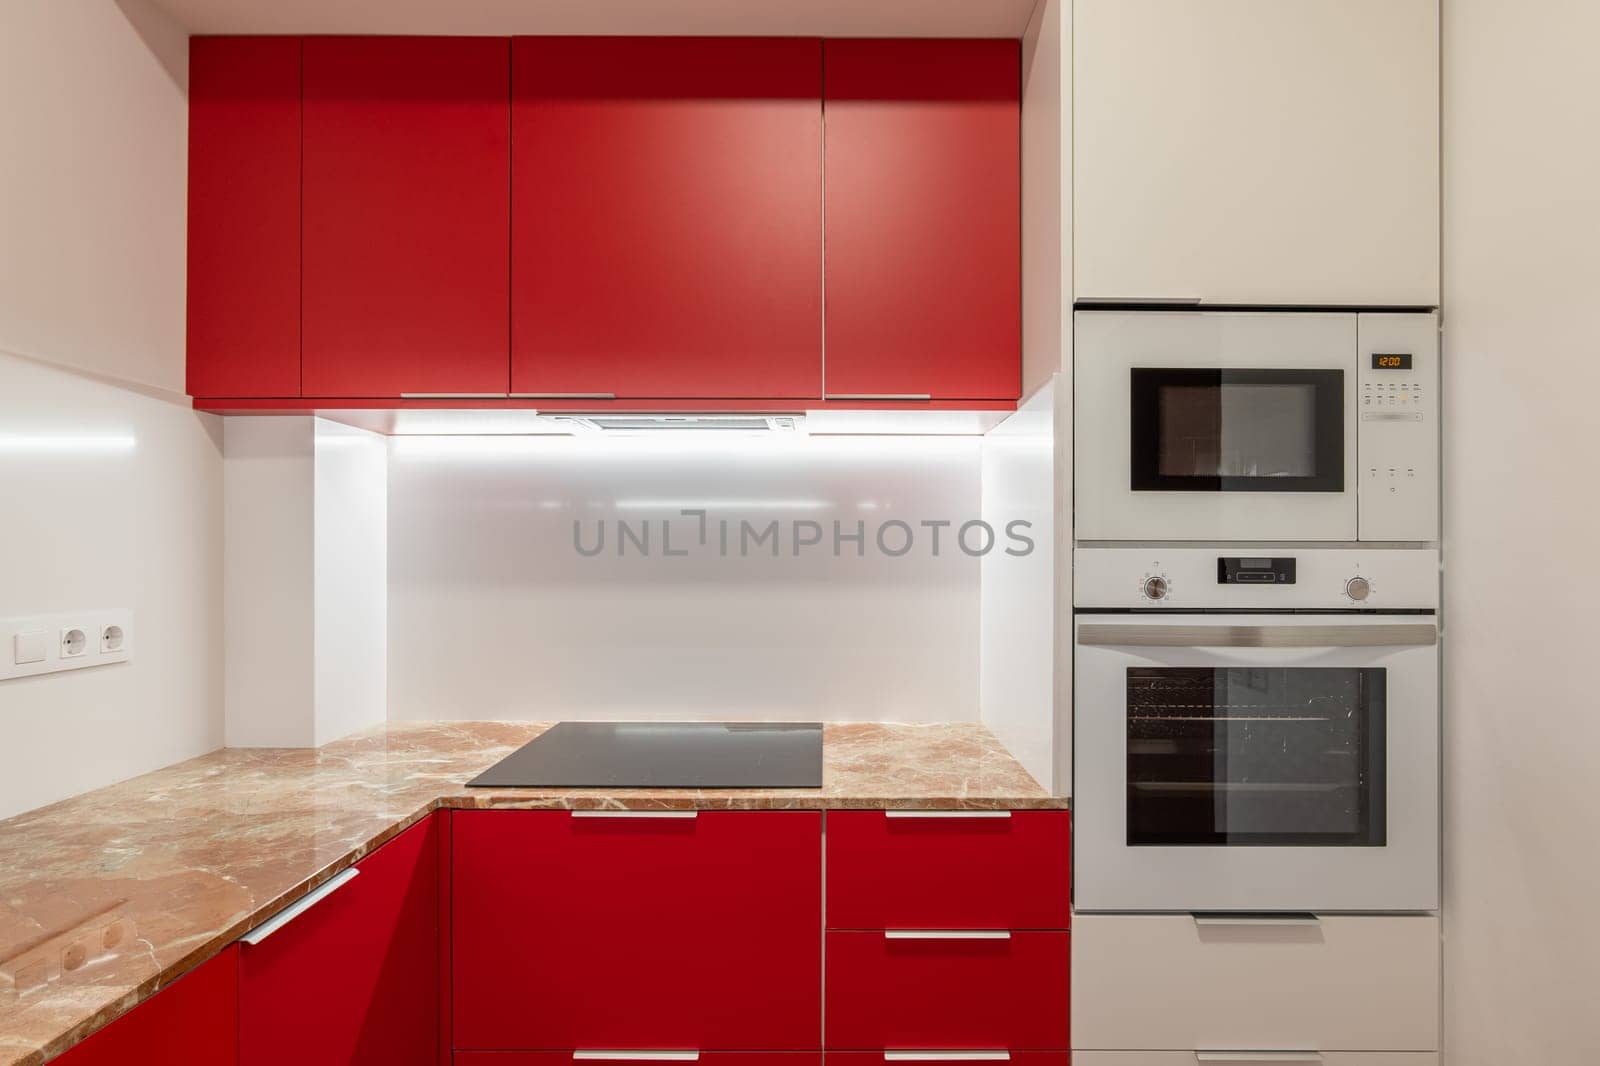 Vibrant red kitchen cabinets with modern appliances and marble countertop by apavlin